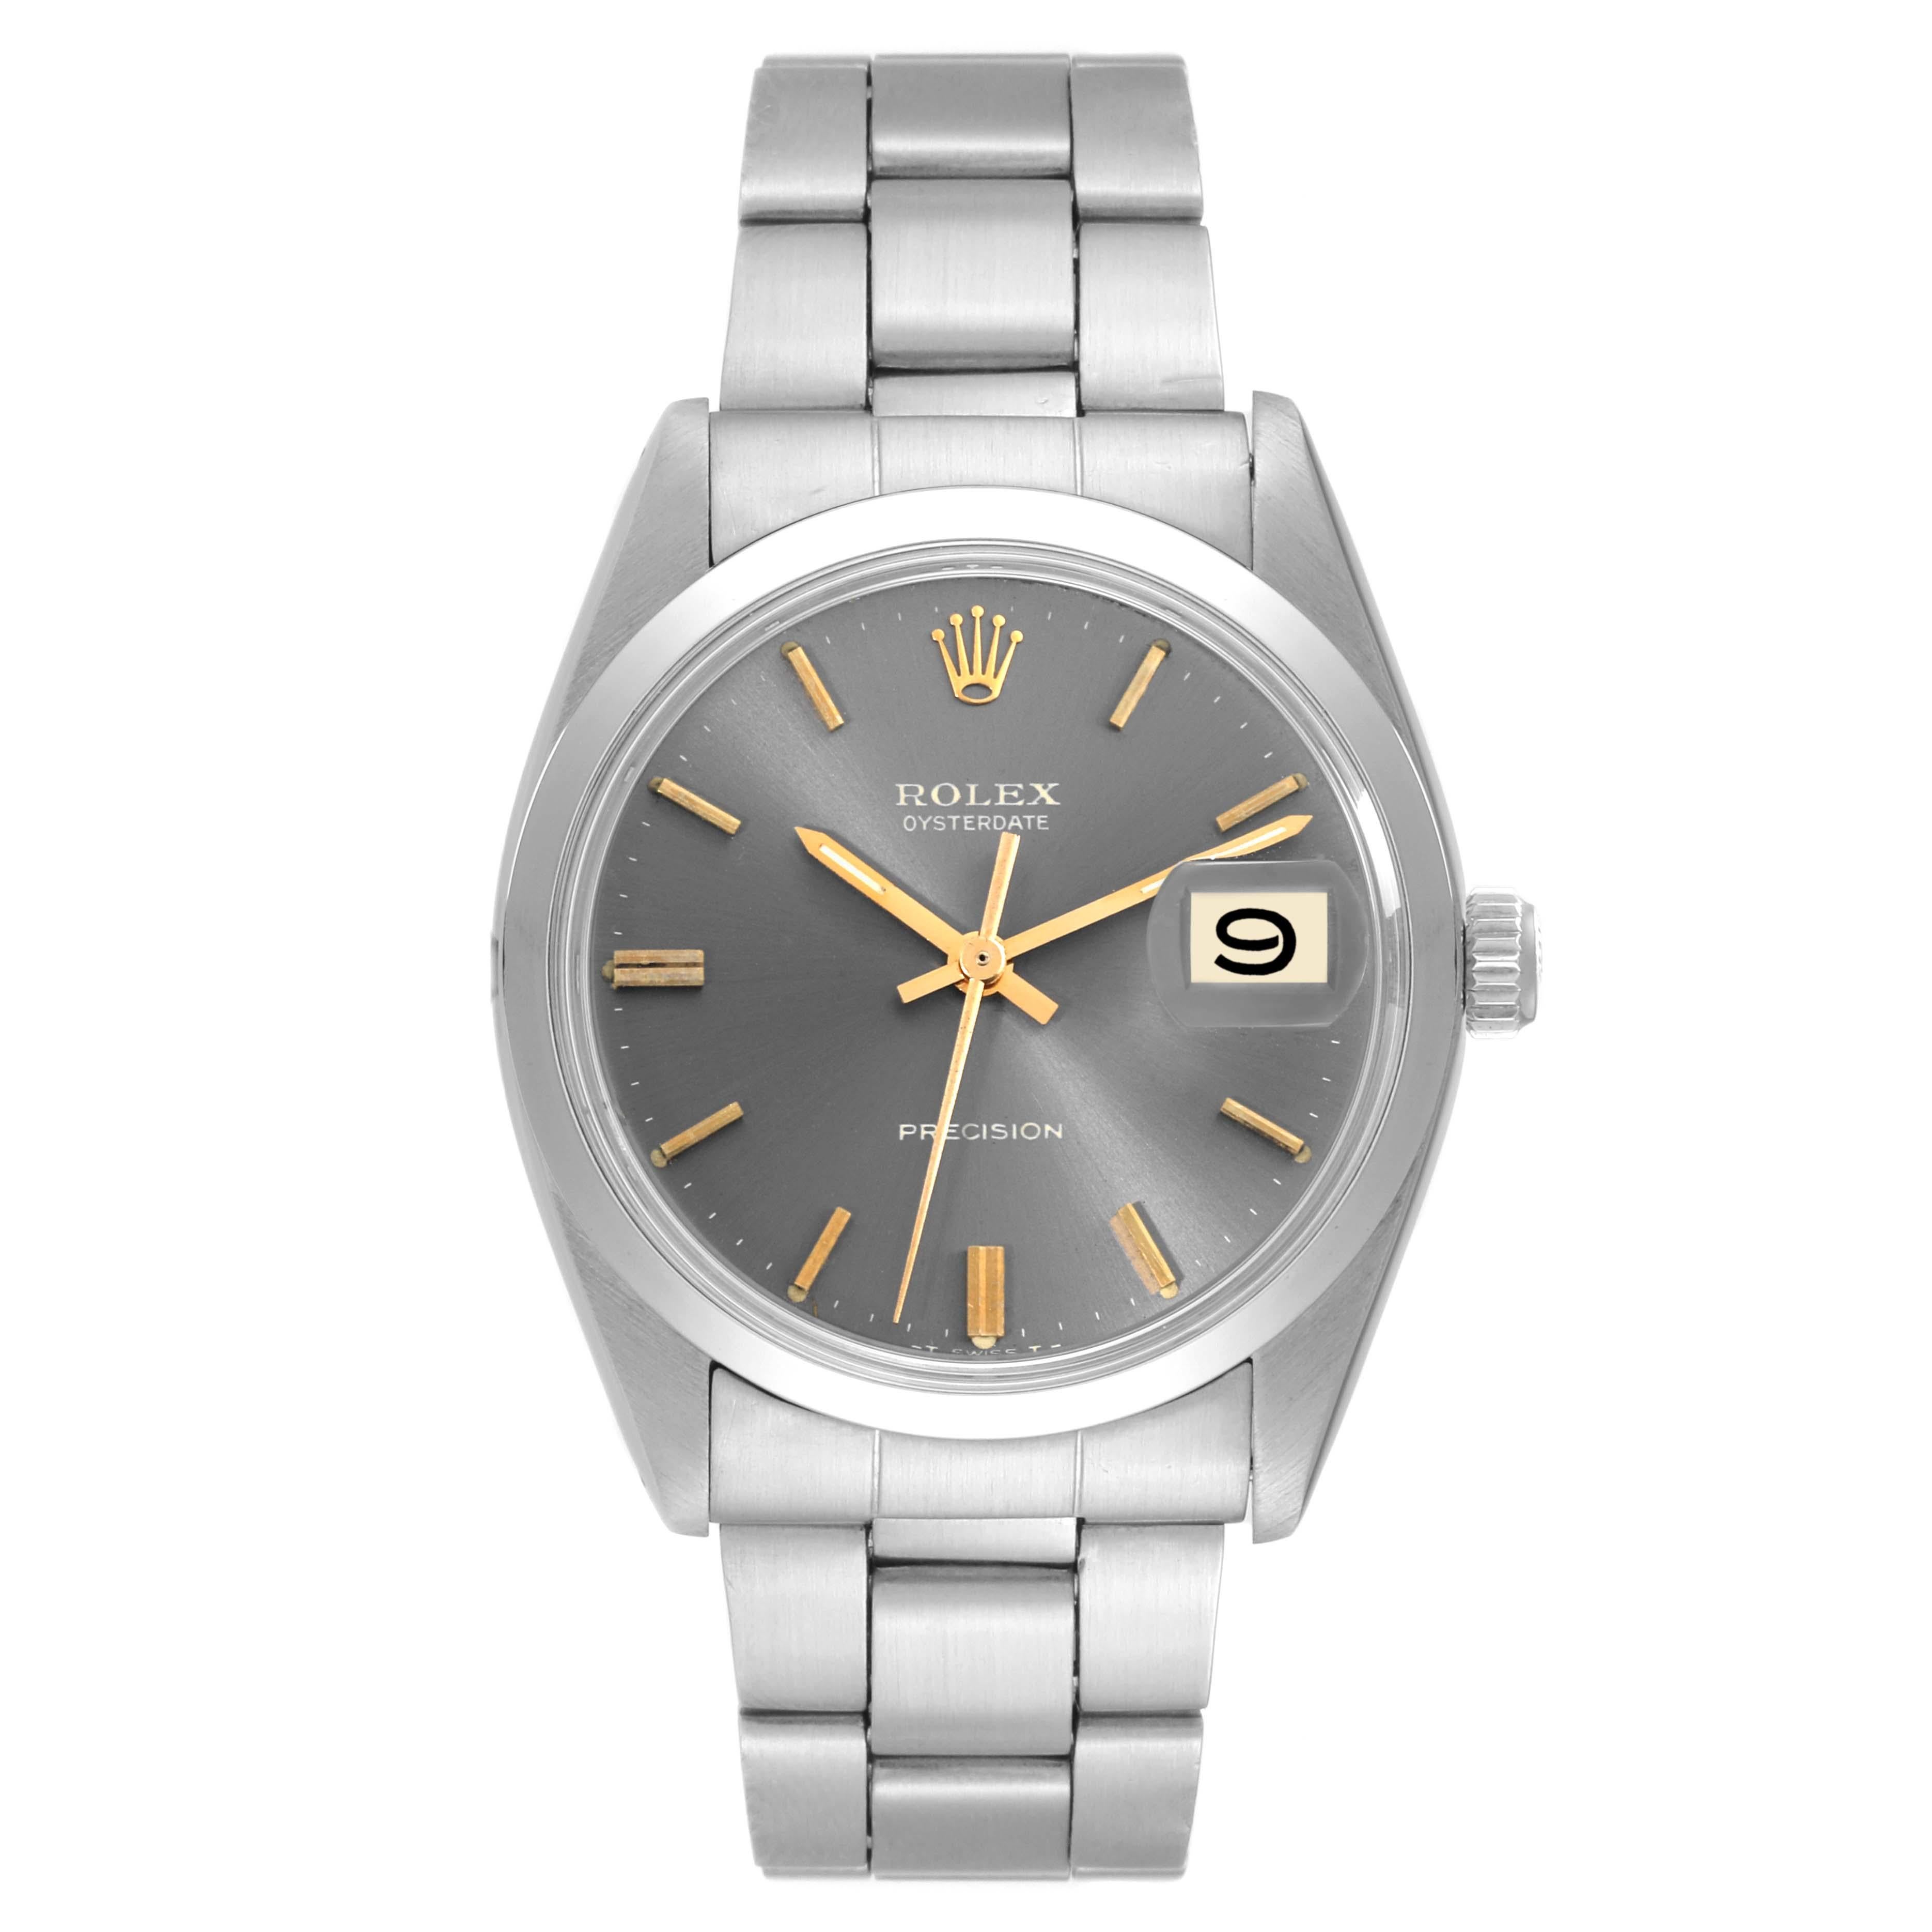 Rolex OysterDate Precision Slate Dial Steel Vintage Mens Watch 6694. Manual-winding movement. Stainless steel oyster case 35.0 mm in diameter. Rolex logo on a crown. Stainless steel smooth domed bezel. Acrylic crystal with cyclops magnifier. Slate